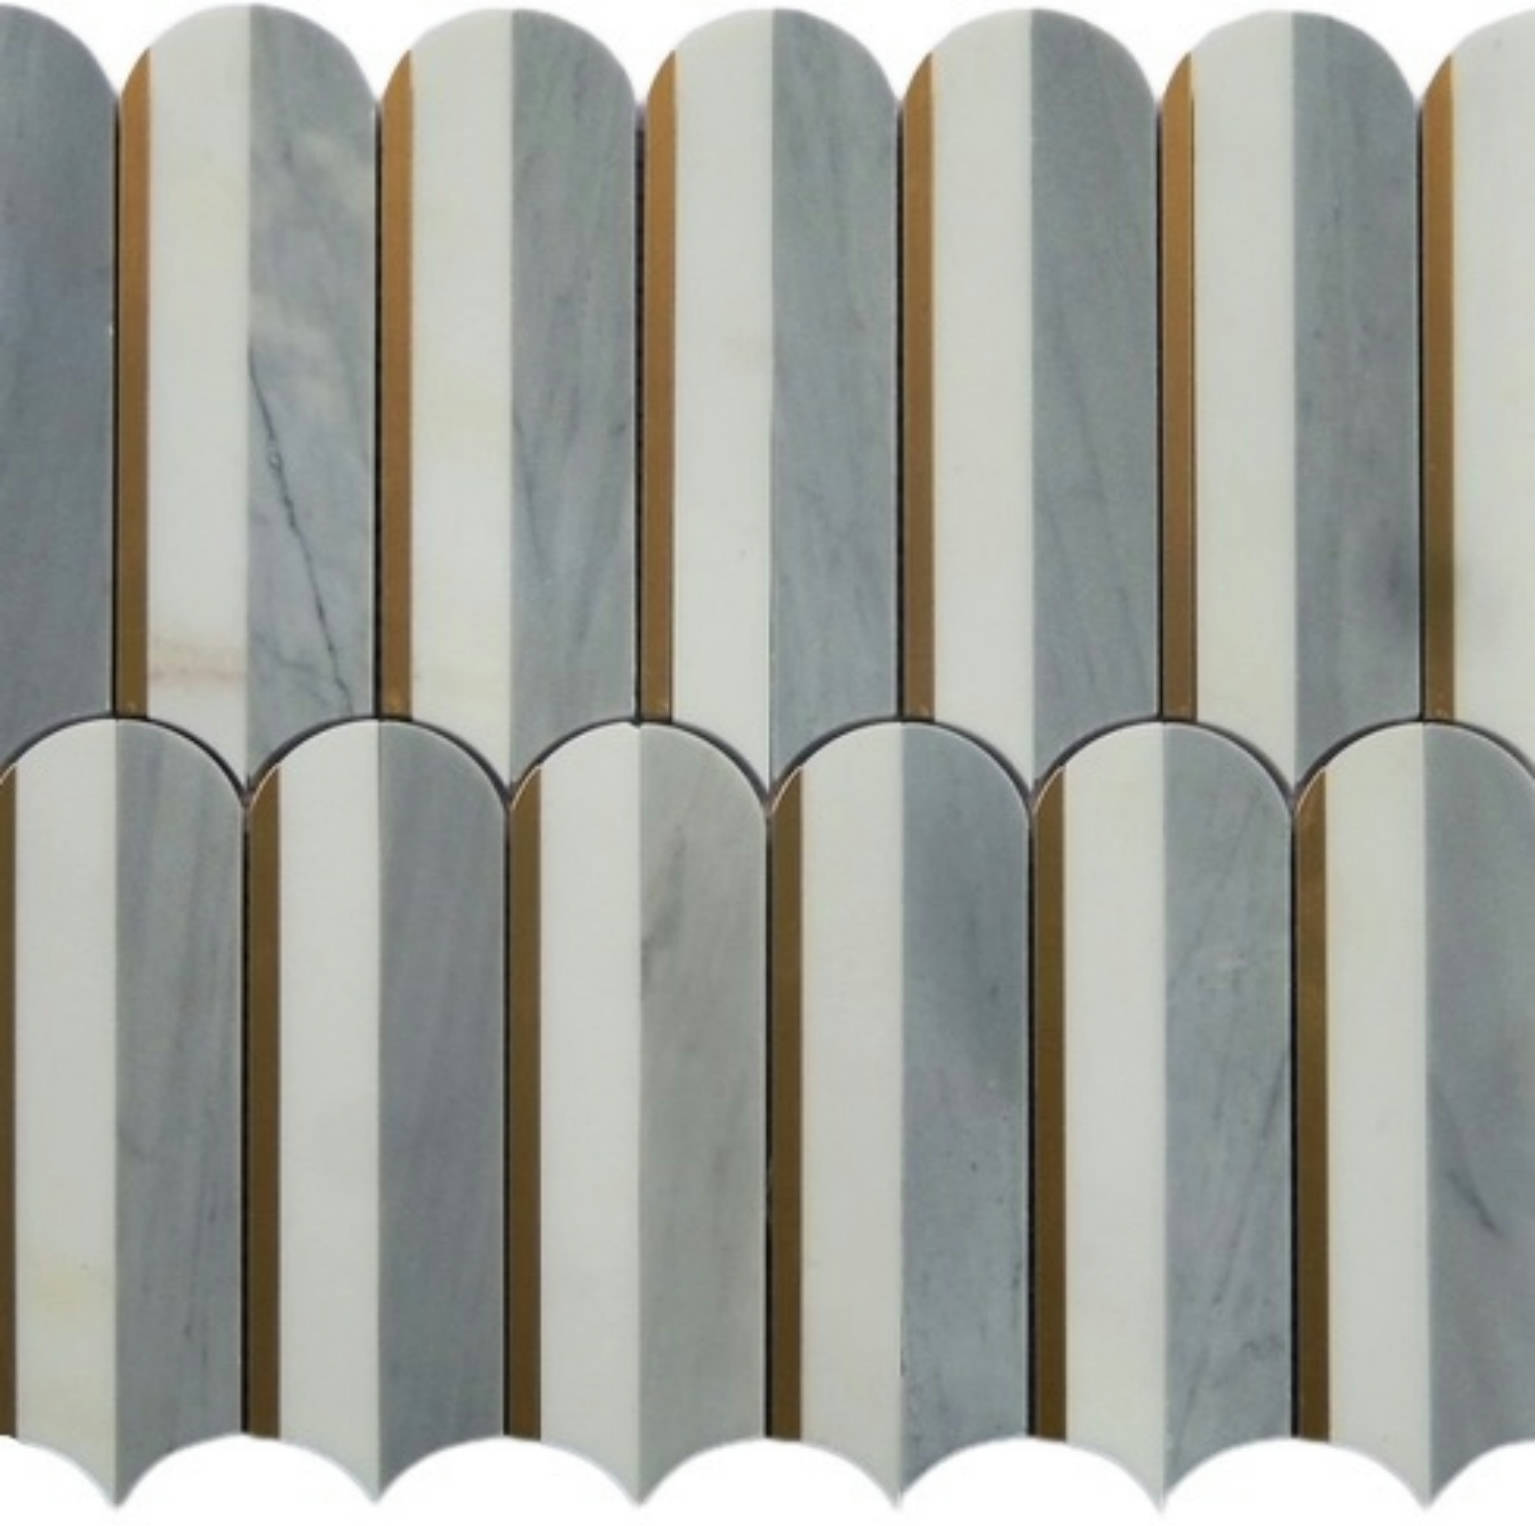 Acropolis | Stones And More | Finest selection of Mosaics, Glass, Tile and Stone